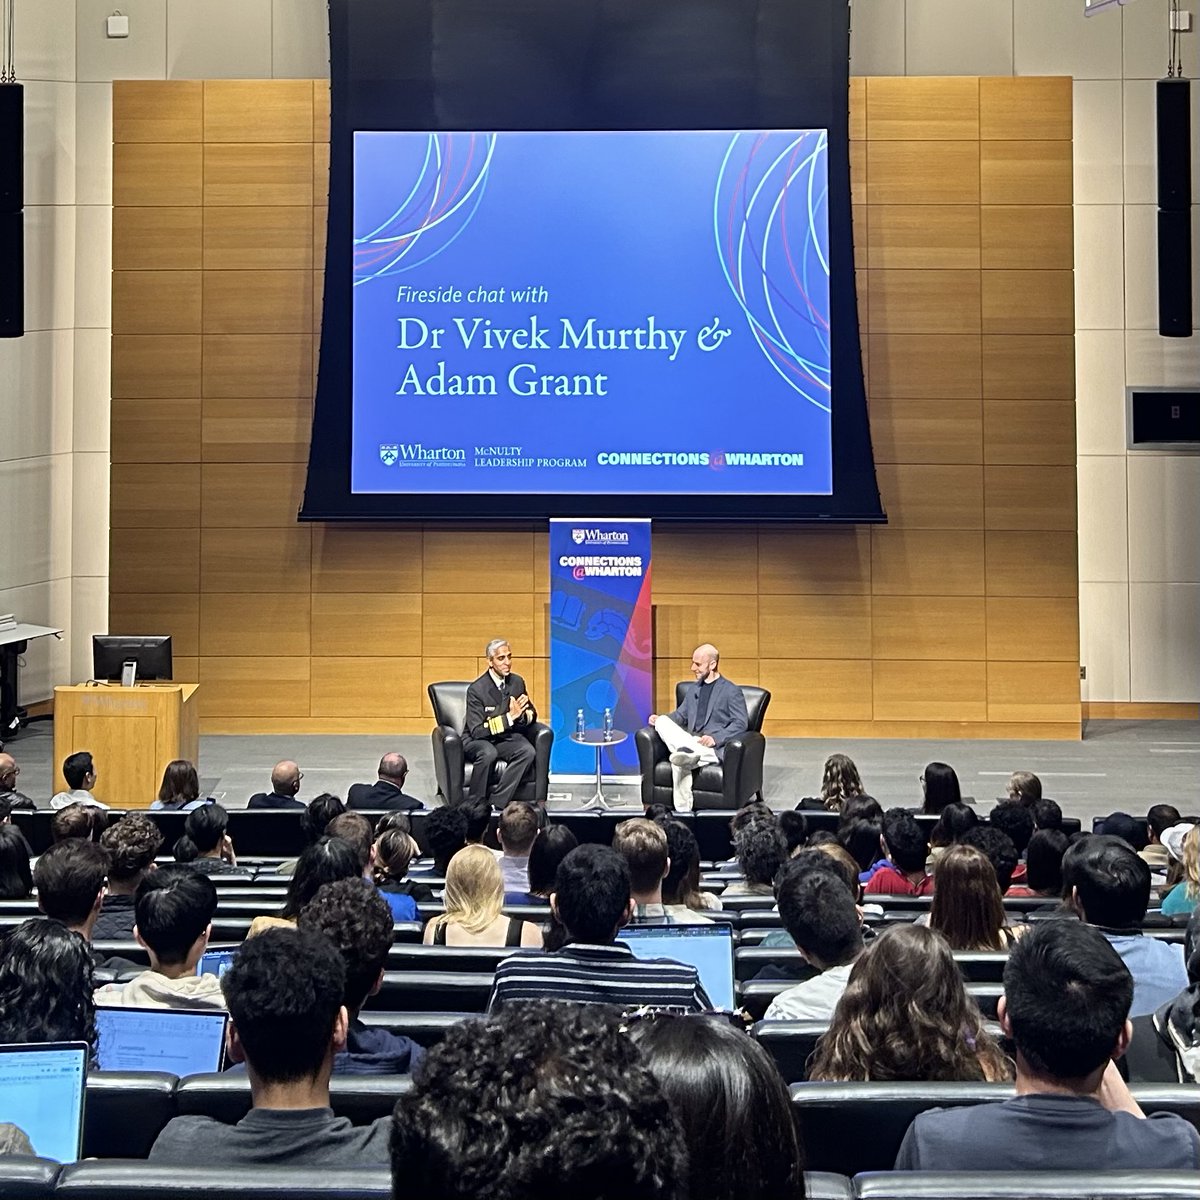 I had a great conversation with @AdamMGrant as part of @Wharton’s Authors@Wharton Speaker Series. This program was created to encourage dialogue and build connection outside of the classroom, and it offered an opportunity to explore how to find purpose on college campuses.